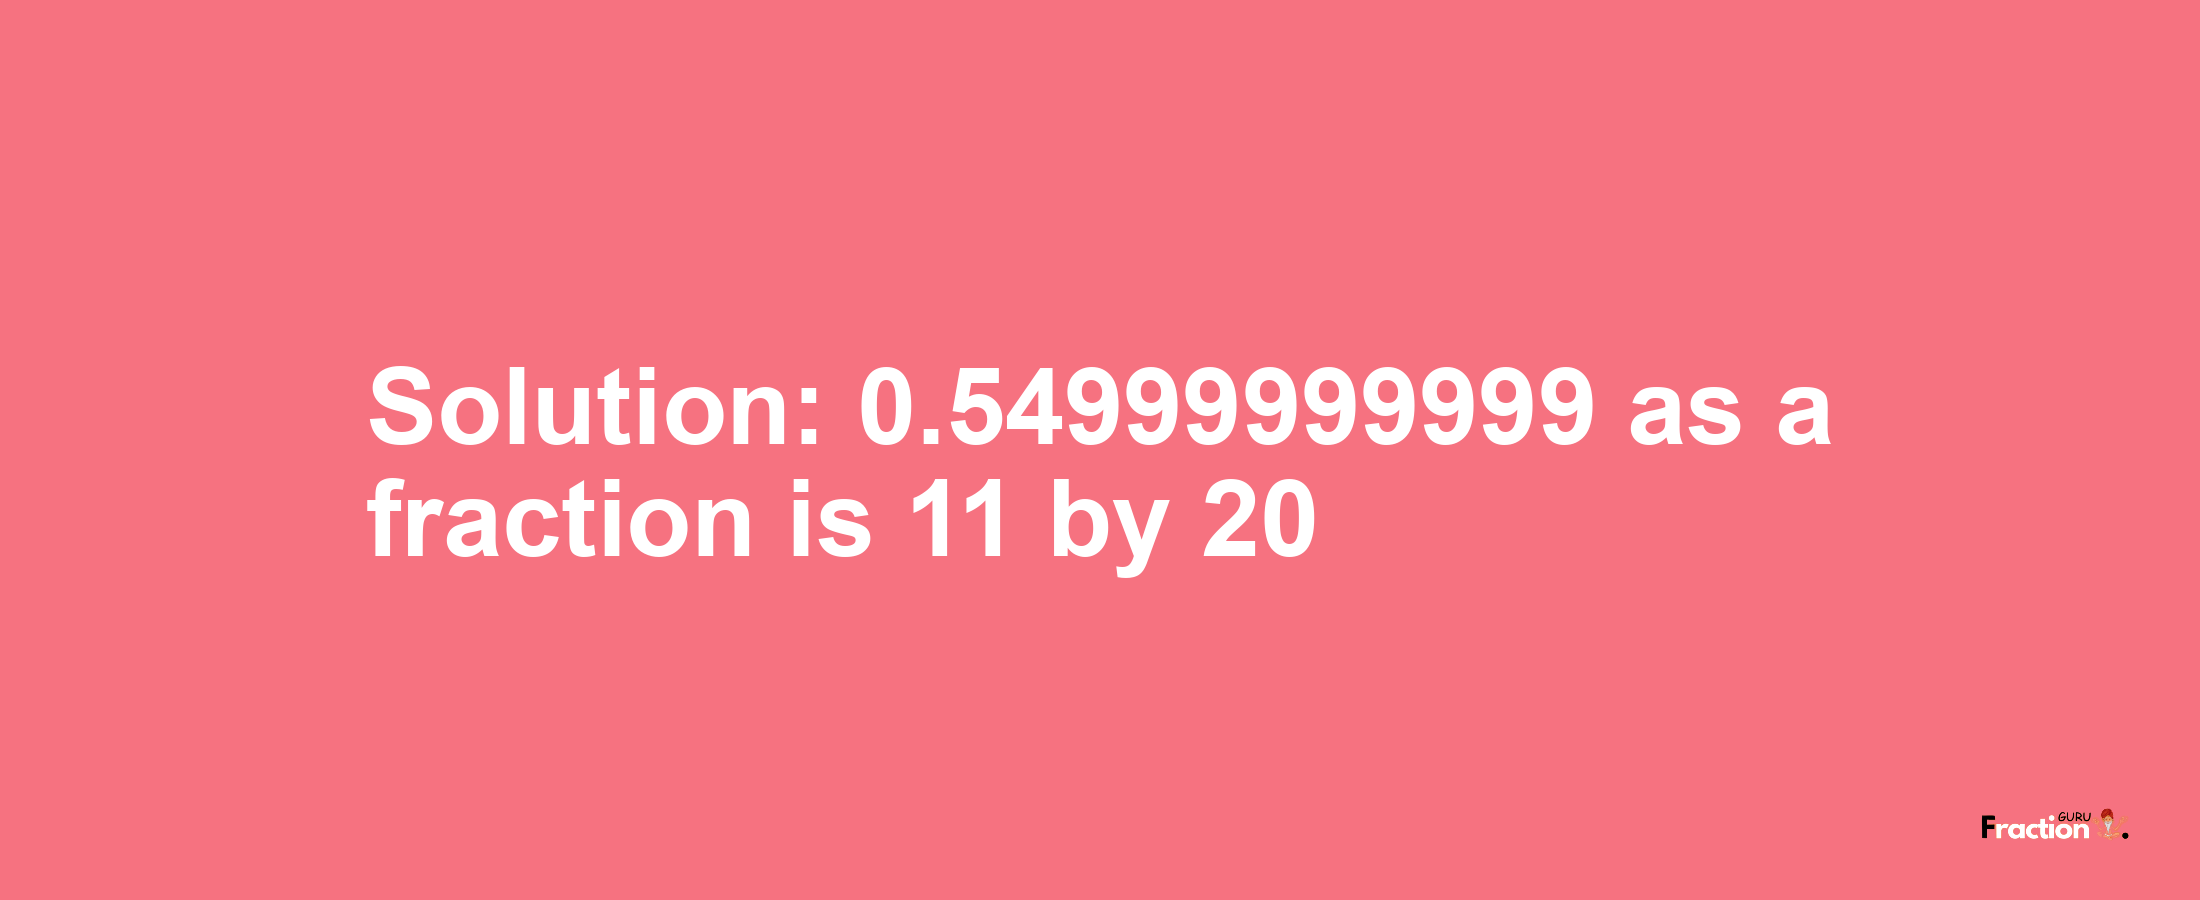 Solution:0.54999999999 as a fraction is 11/20